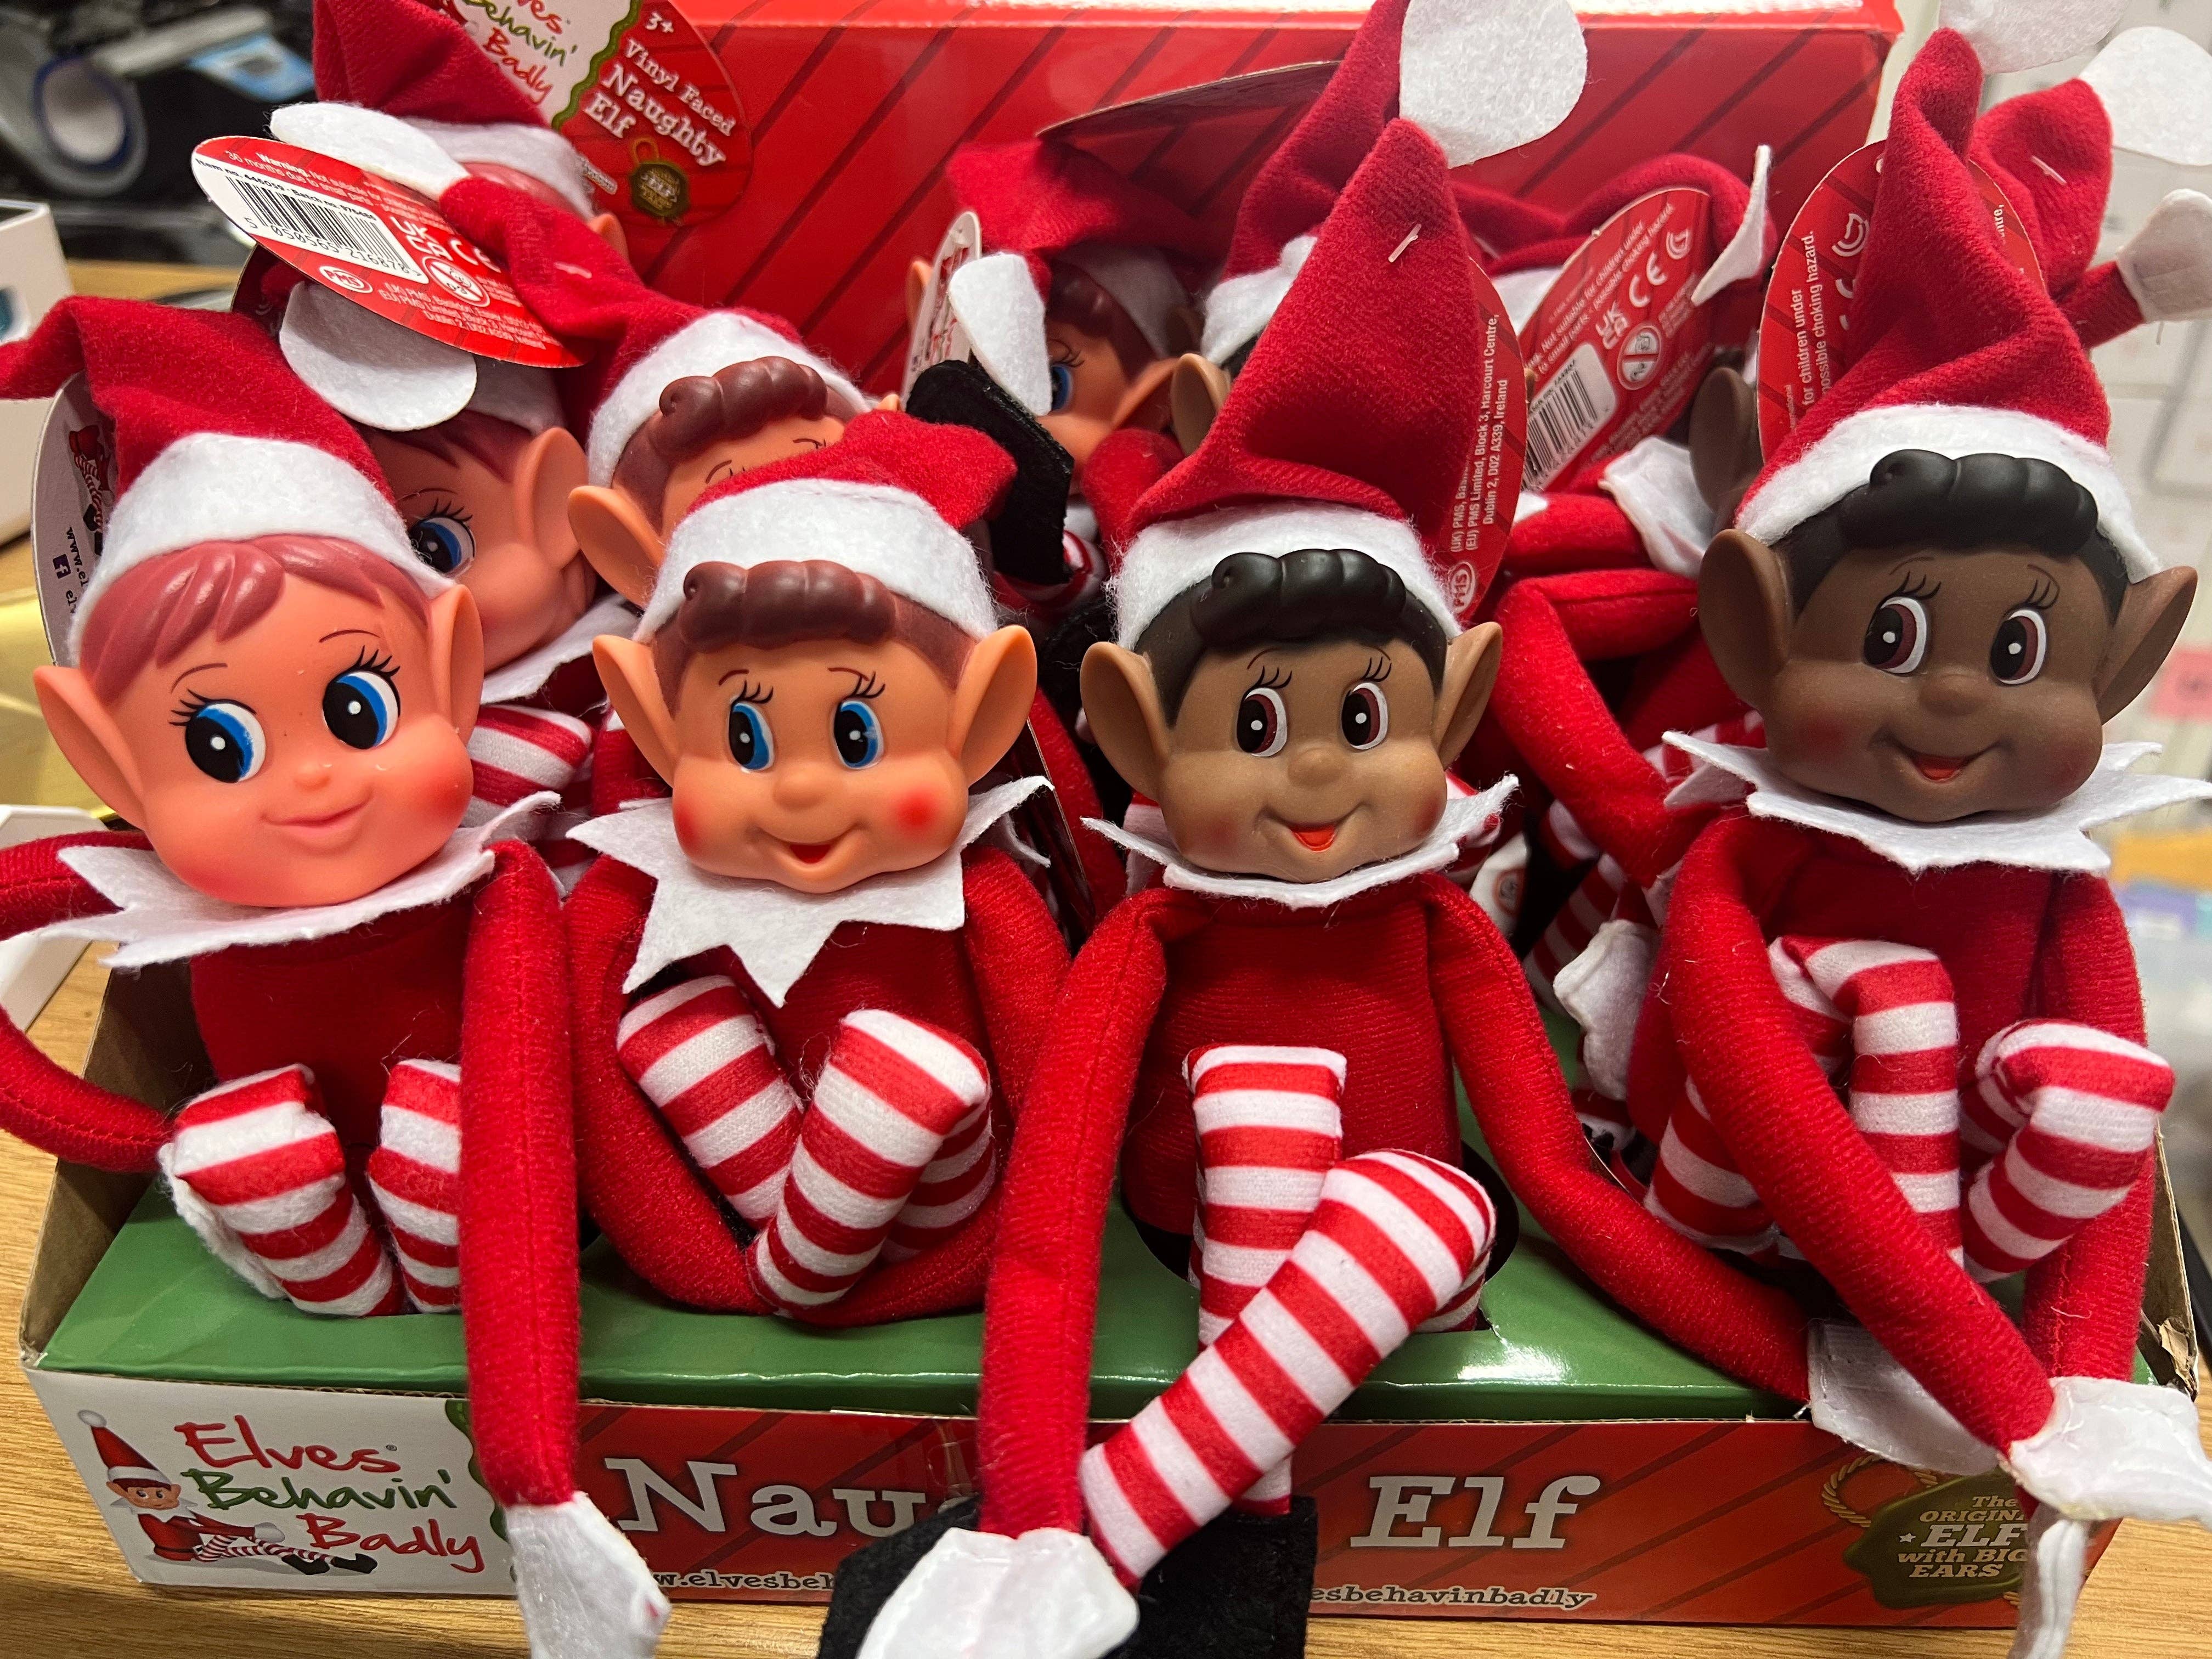 Elf on the shelf/Elves behaving badly  Everything Elfish- Elves, props &  mischief! FREE UK DELIVERY on all orders over £30